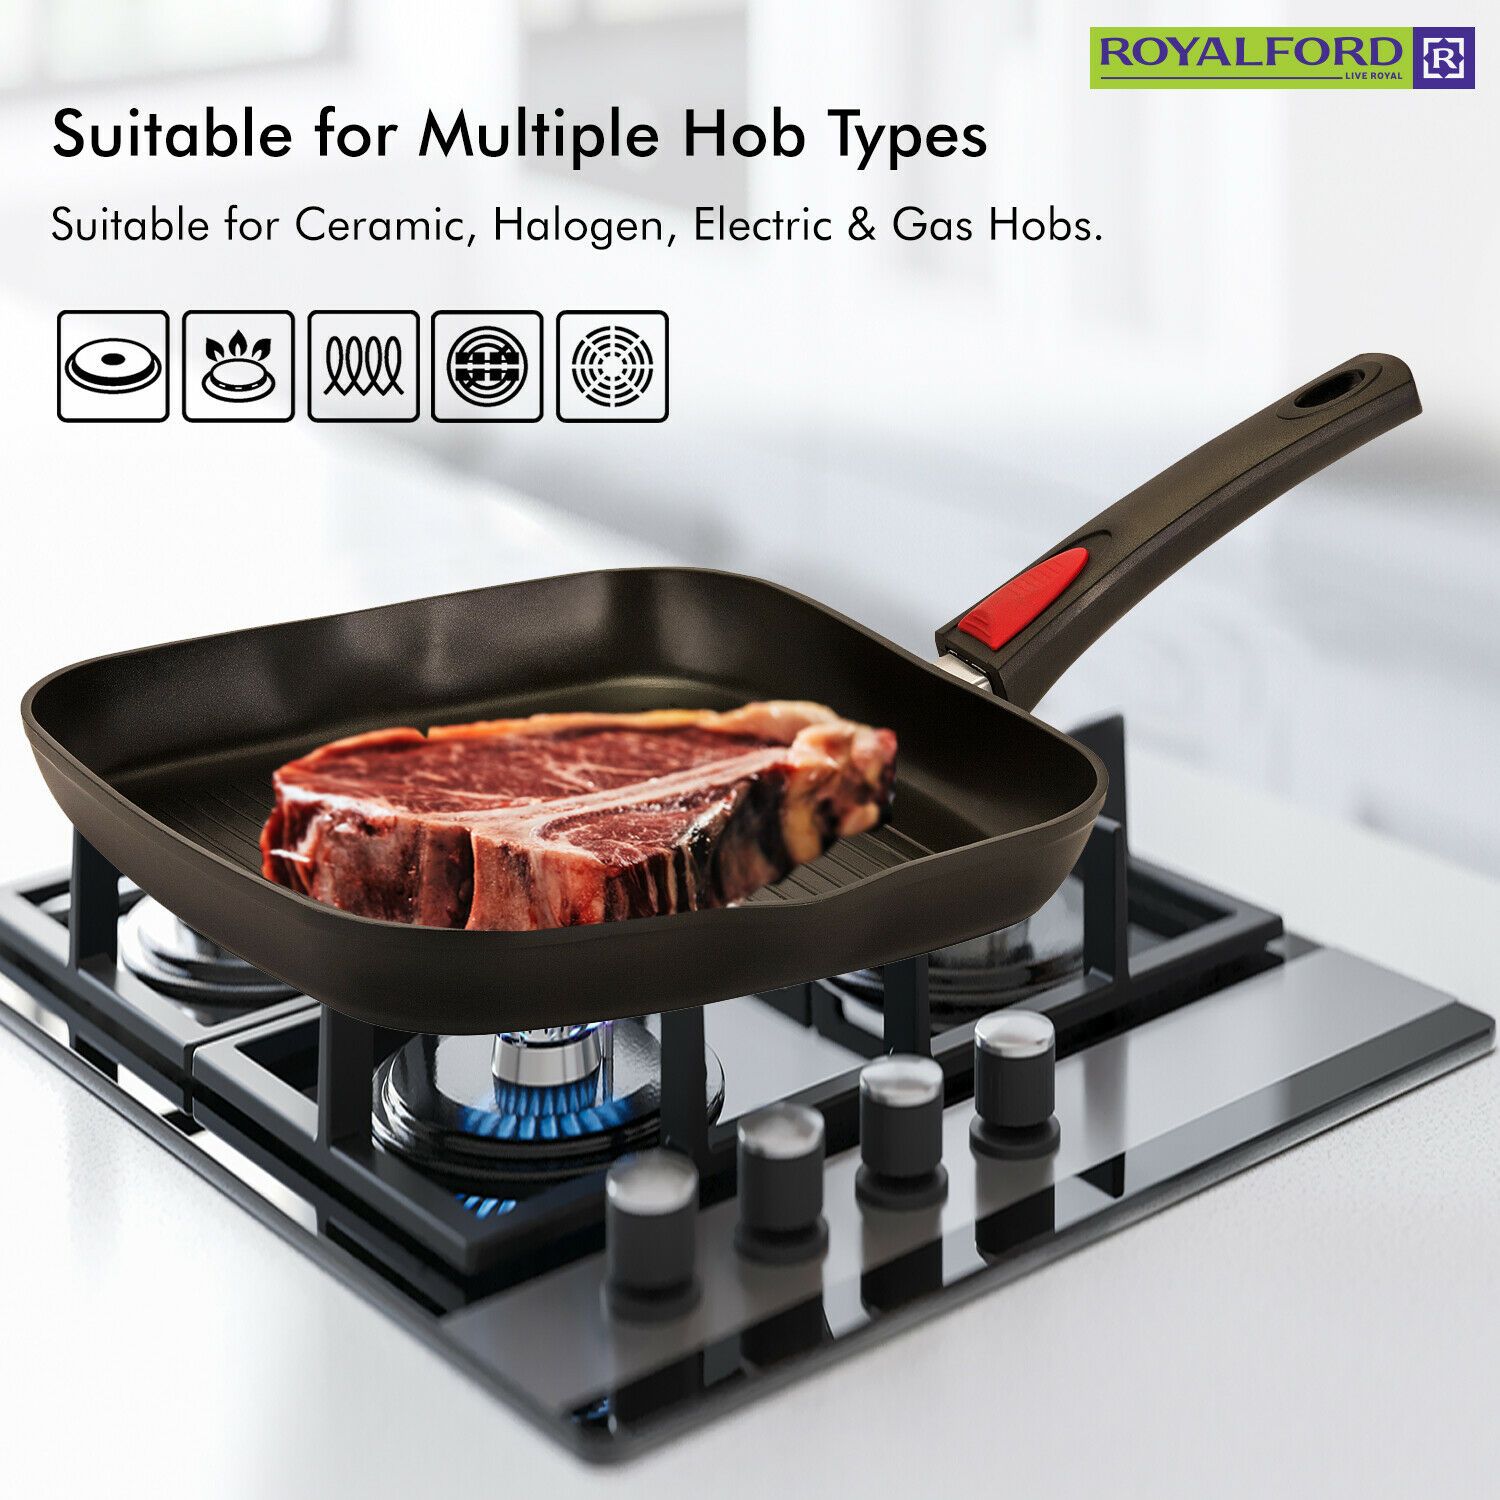 Grill Frying Pan With Detachable Handle By Royalford Royalford 